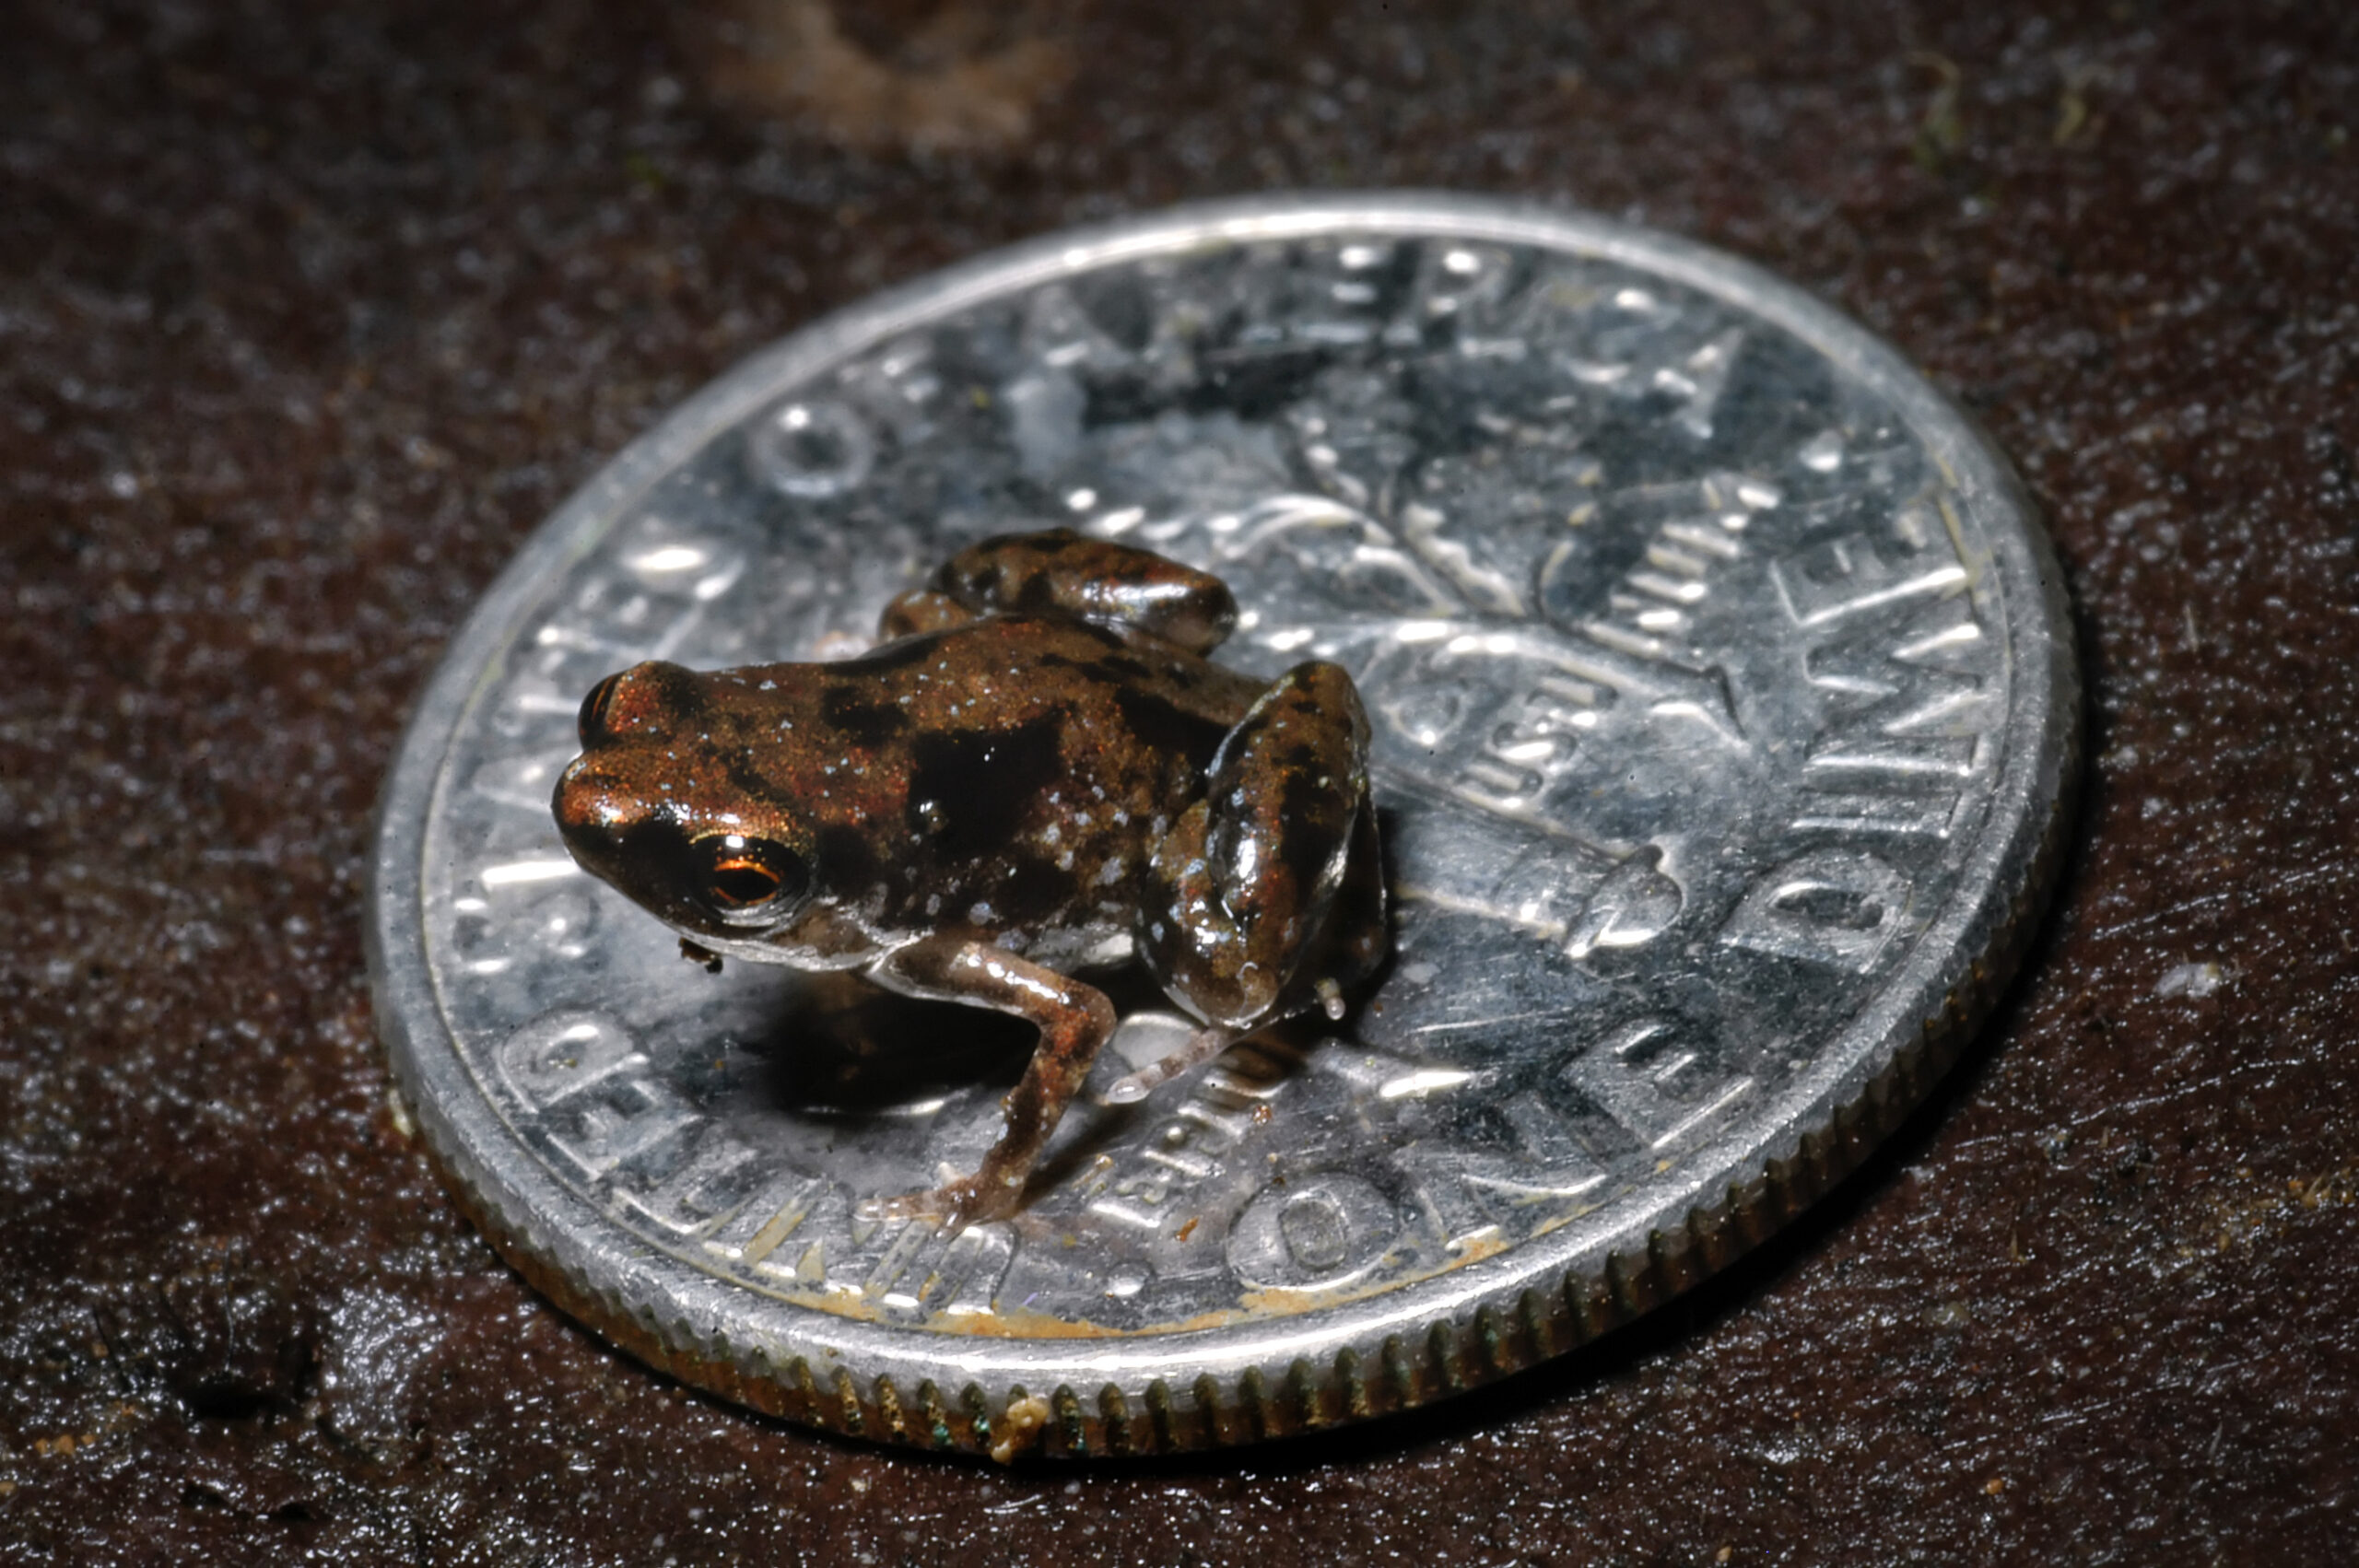 This Newly Discovered Frog Is the World’s Smallest Vertebrate